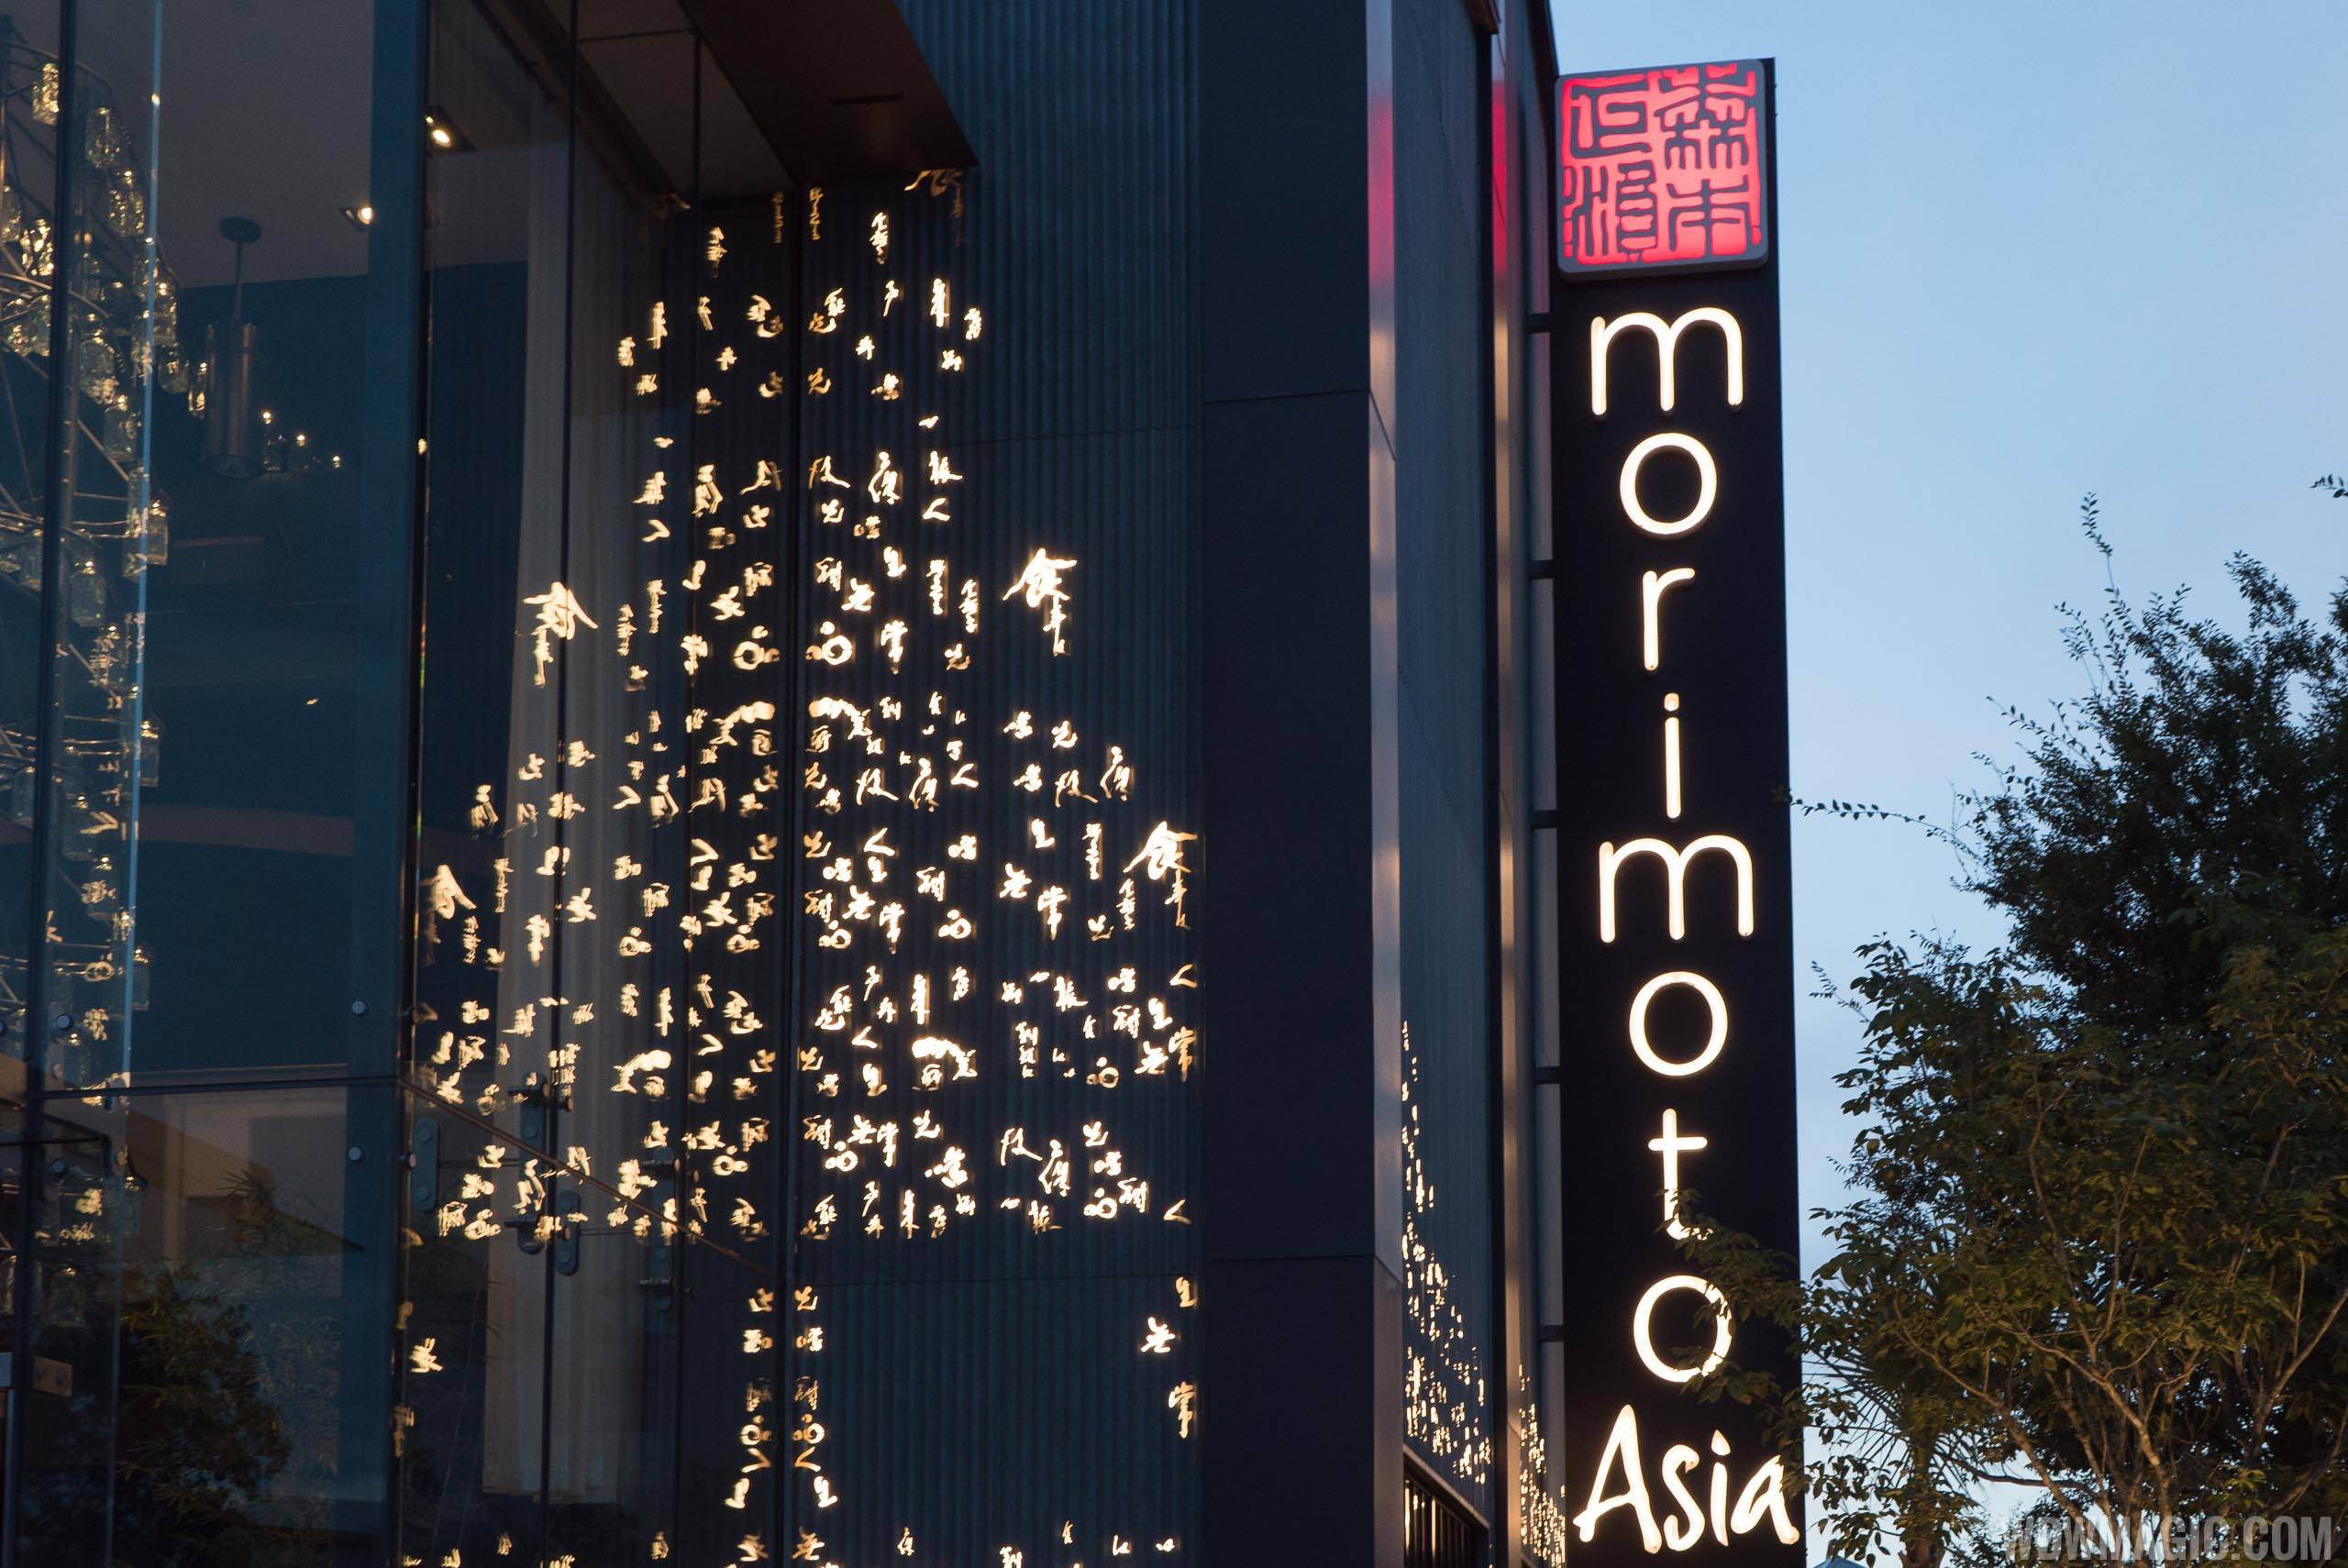 Bubbles & Brunch special dining event coming to Morimoto Asia at Disney Springs